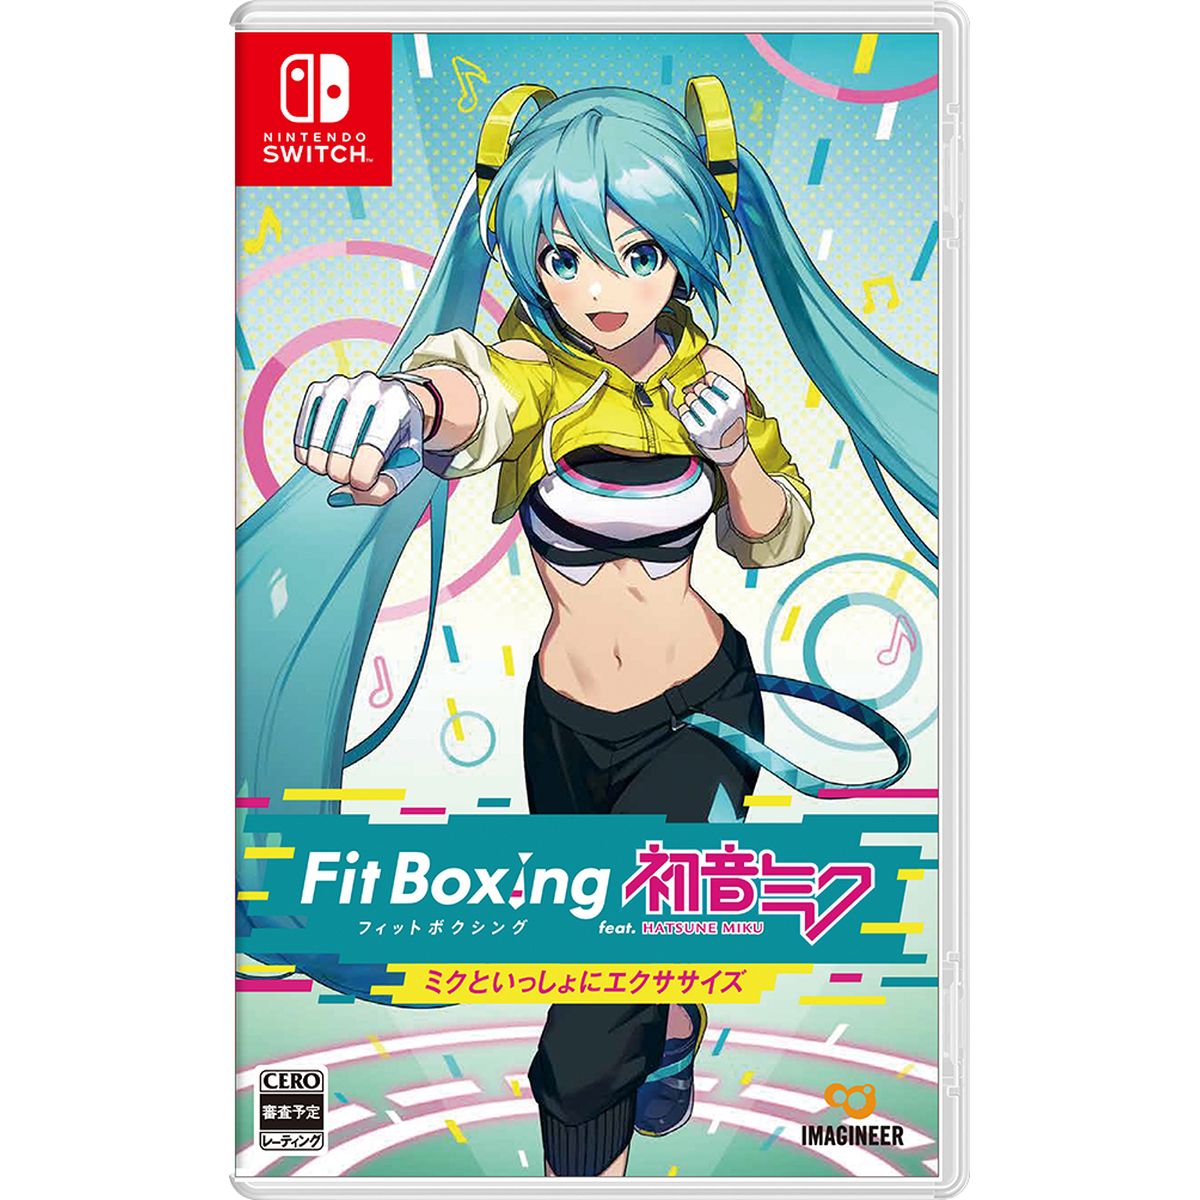 ［Switch］［宅配便］［新品］Fit Boxing feat. 初音ミク ‐ミクといっしょにエクササイズ‐